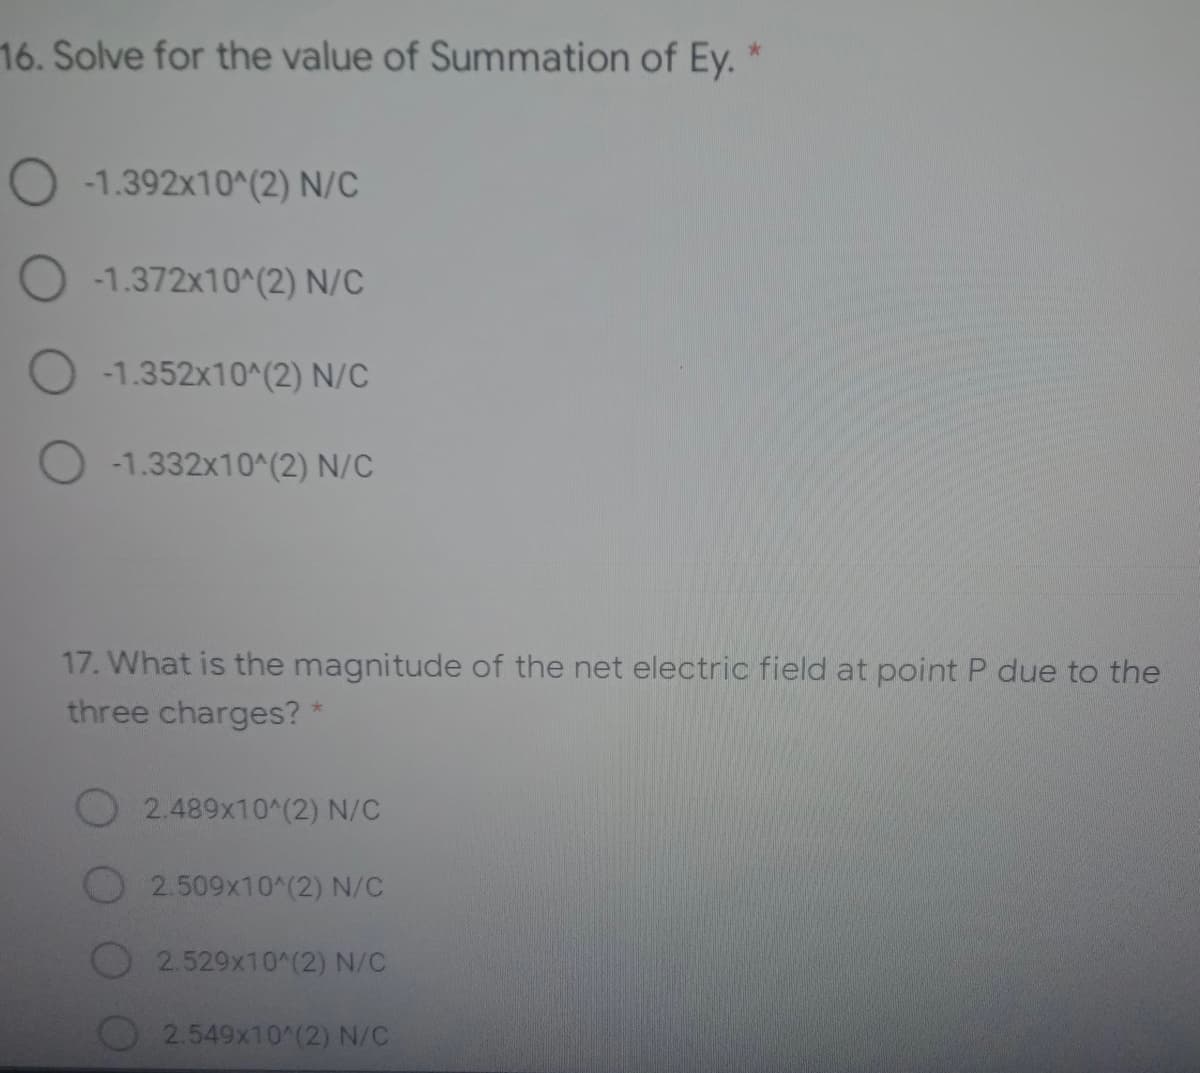 16. Solve for the value of Summation of Ey. *
-1.392x10^(2) N/C
-1.372x10^(2) N/C
O -1.352x10^(2) N/C
O -1.332x10^(2) N/C
17. What is the magnitude of the net electric field at point P due to the
three charges? *
2.489x10^(2) N/C
2.509x10^(2) N/C
2.529x10^(2) N/C
O2.549x10^(2) N/C
